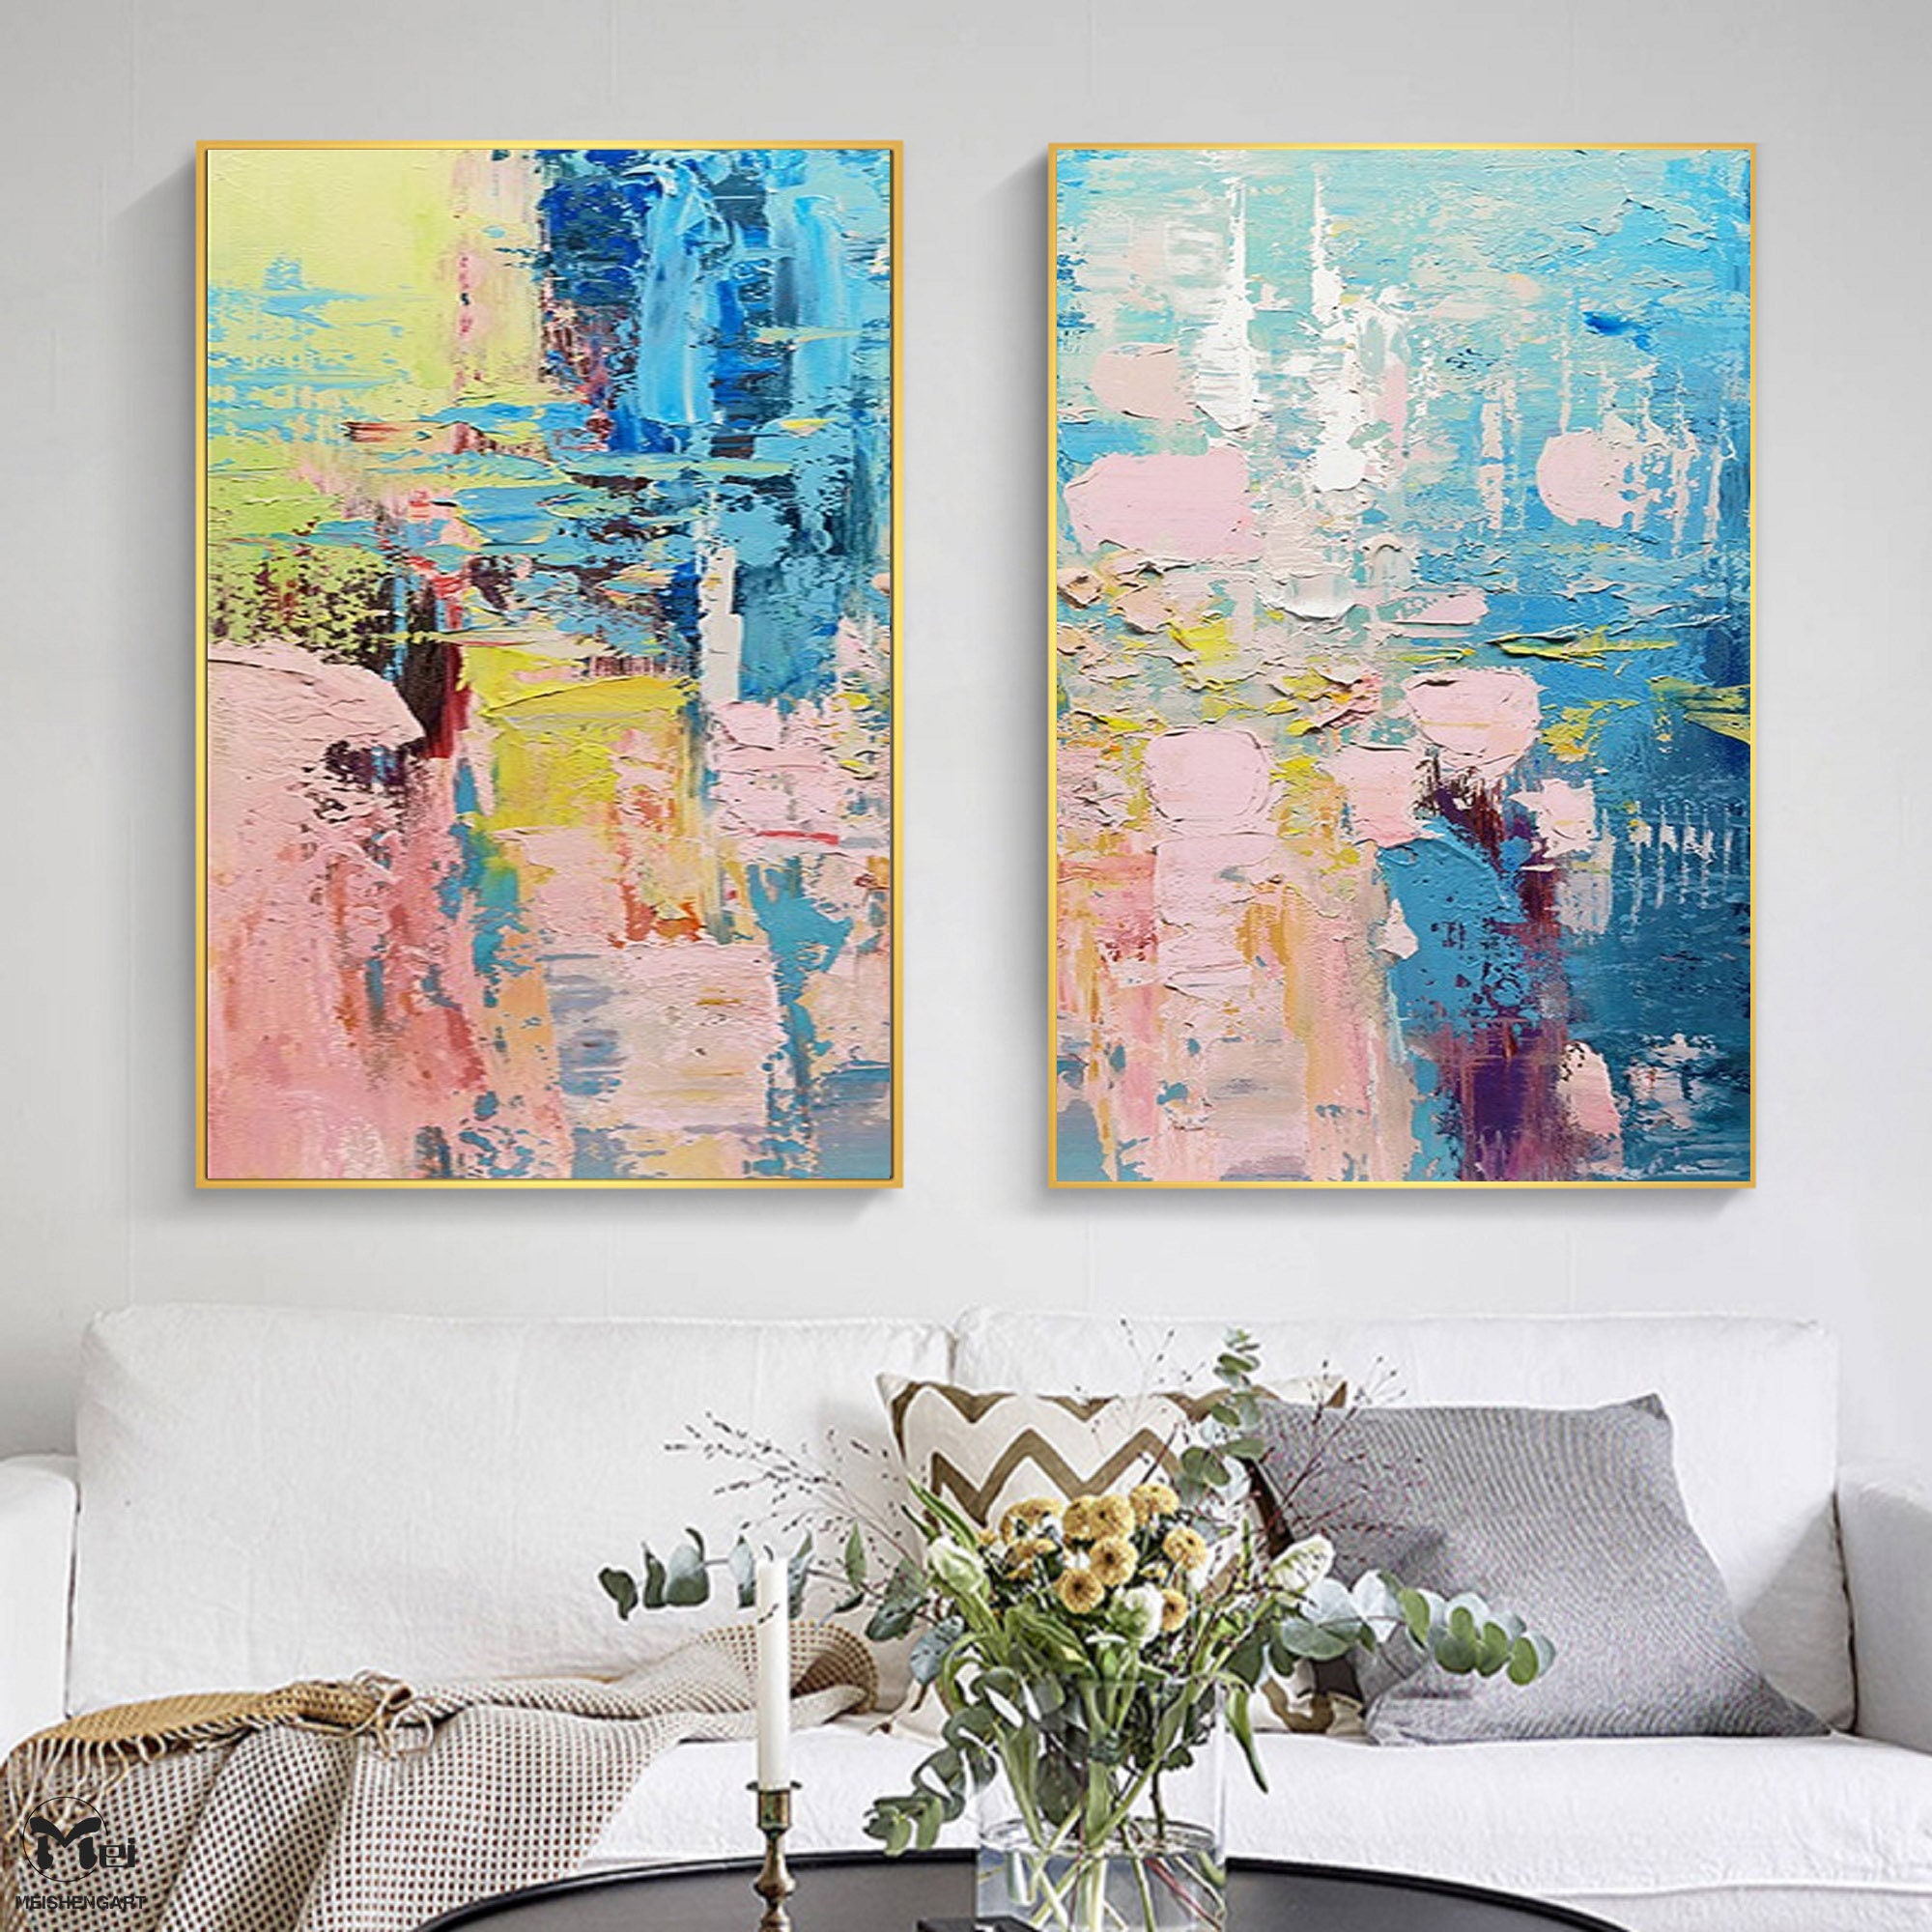 Set of 2 Pieces Painting on Canvas Pink and Blue Painting - Etsy